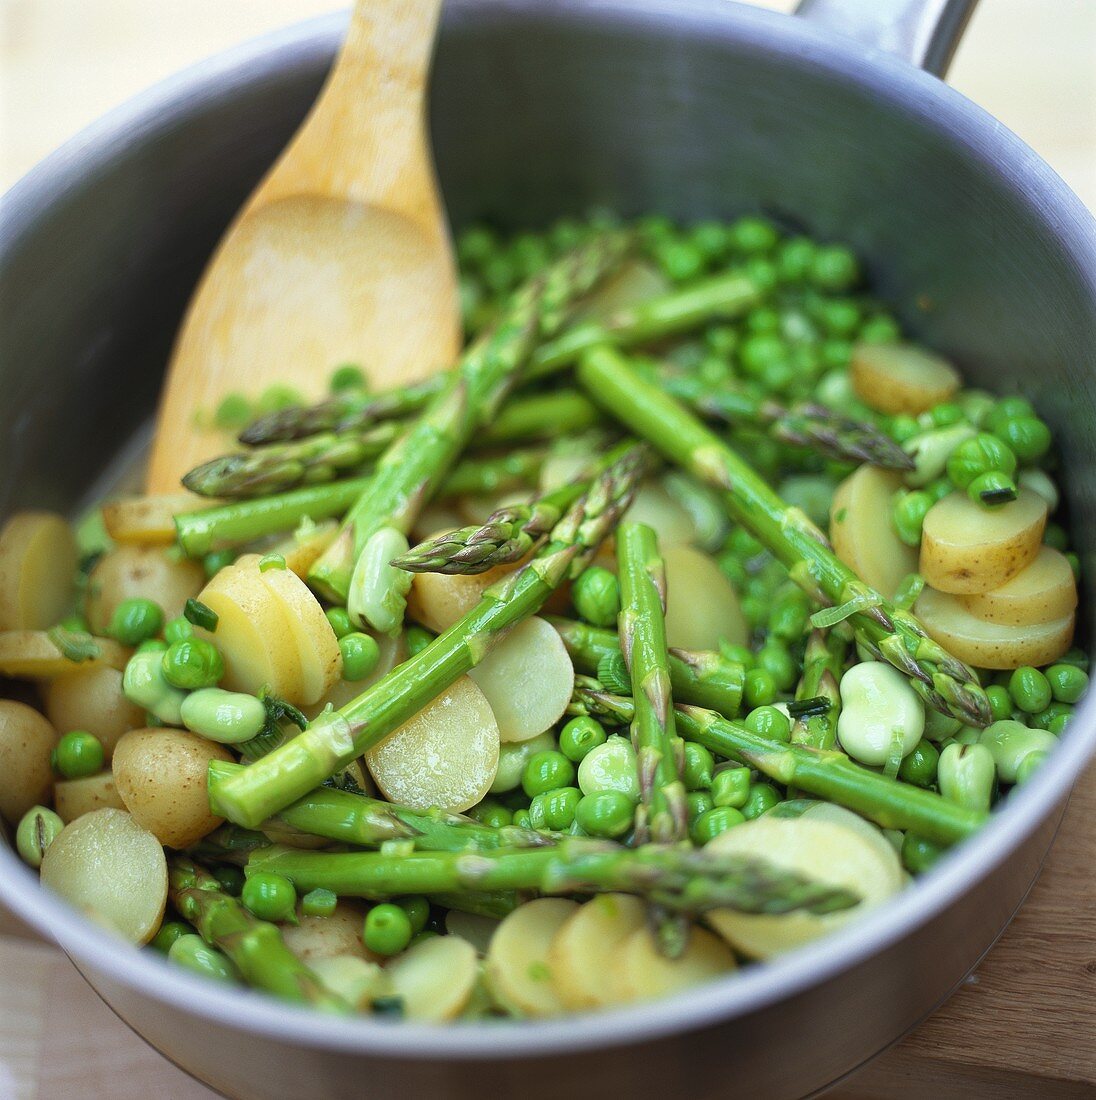 Green asparagus with potatoes and peas in frying pan